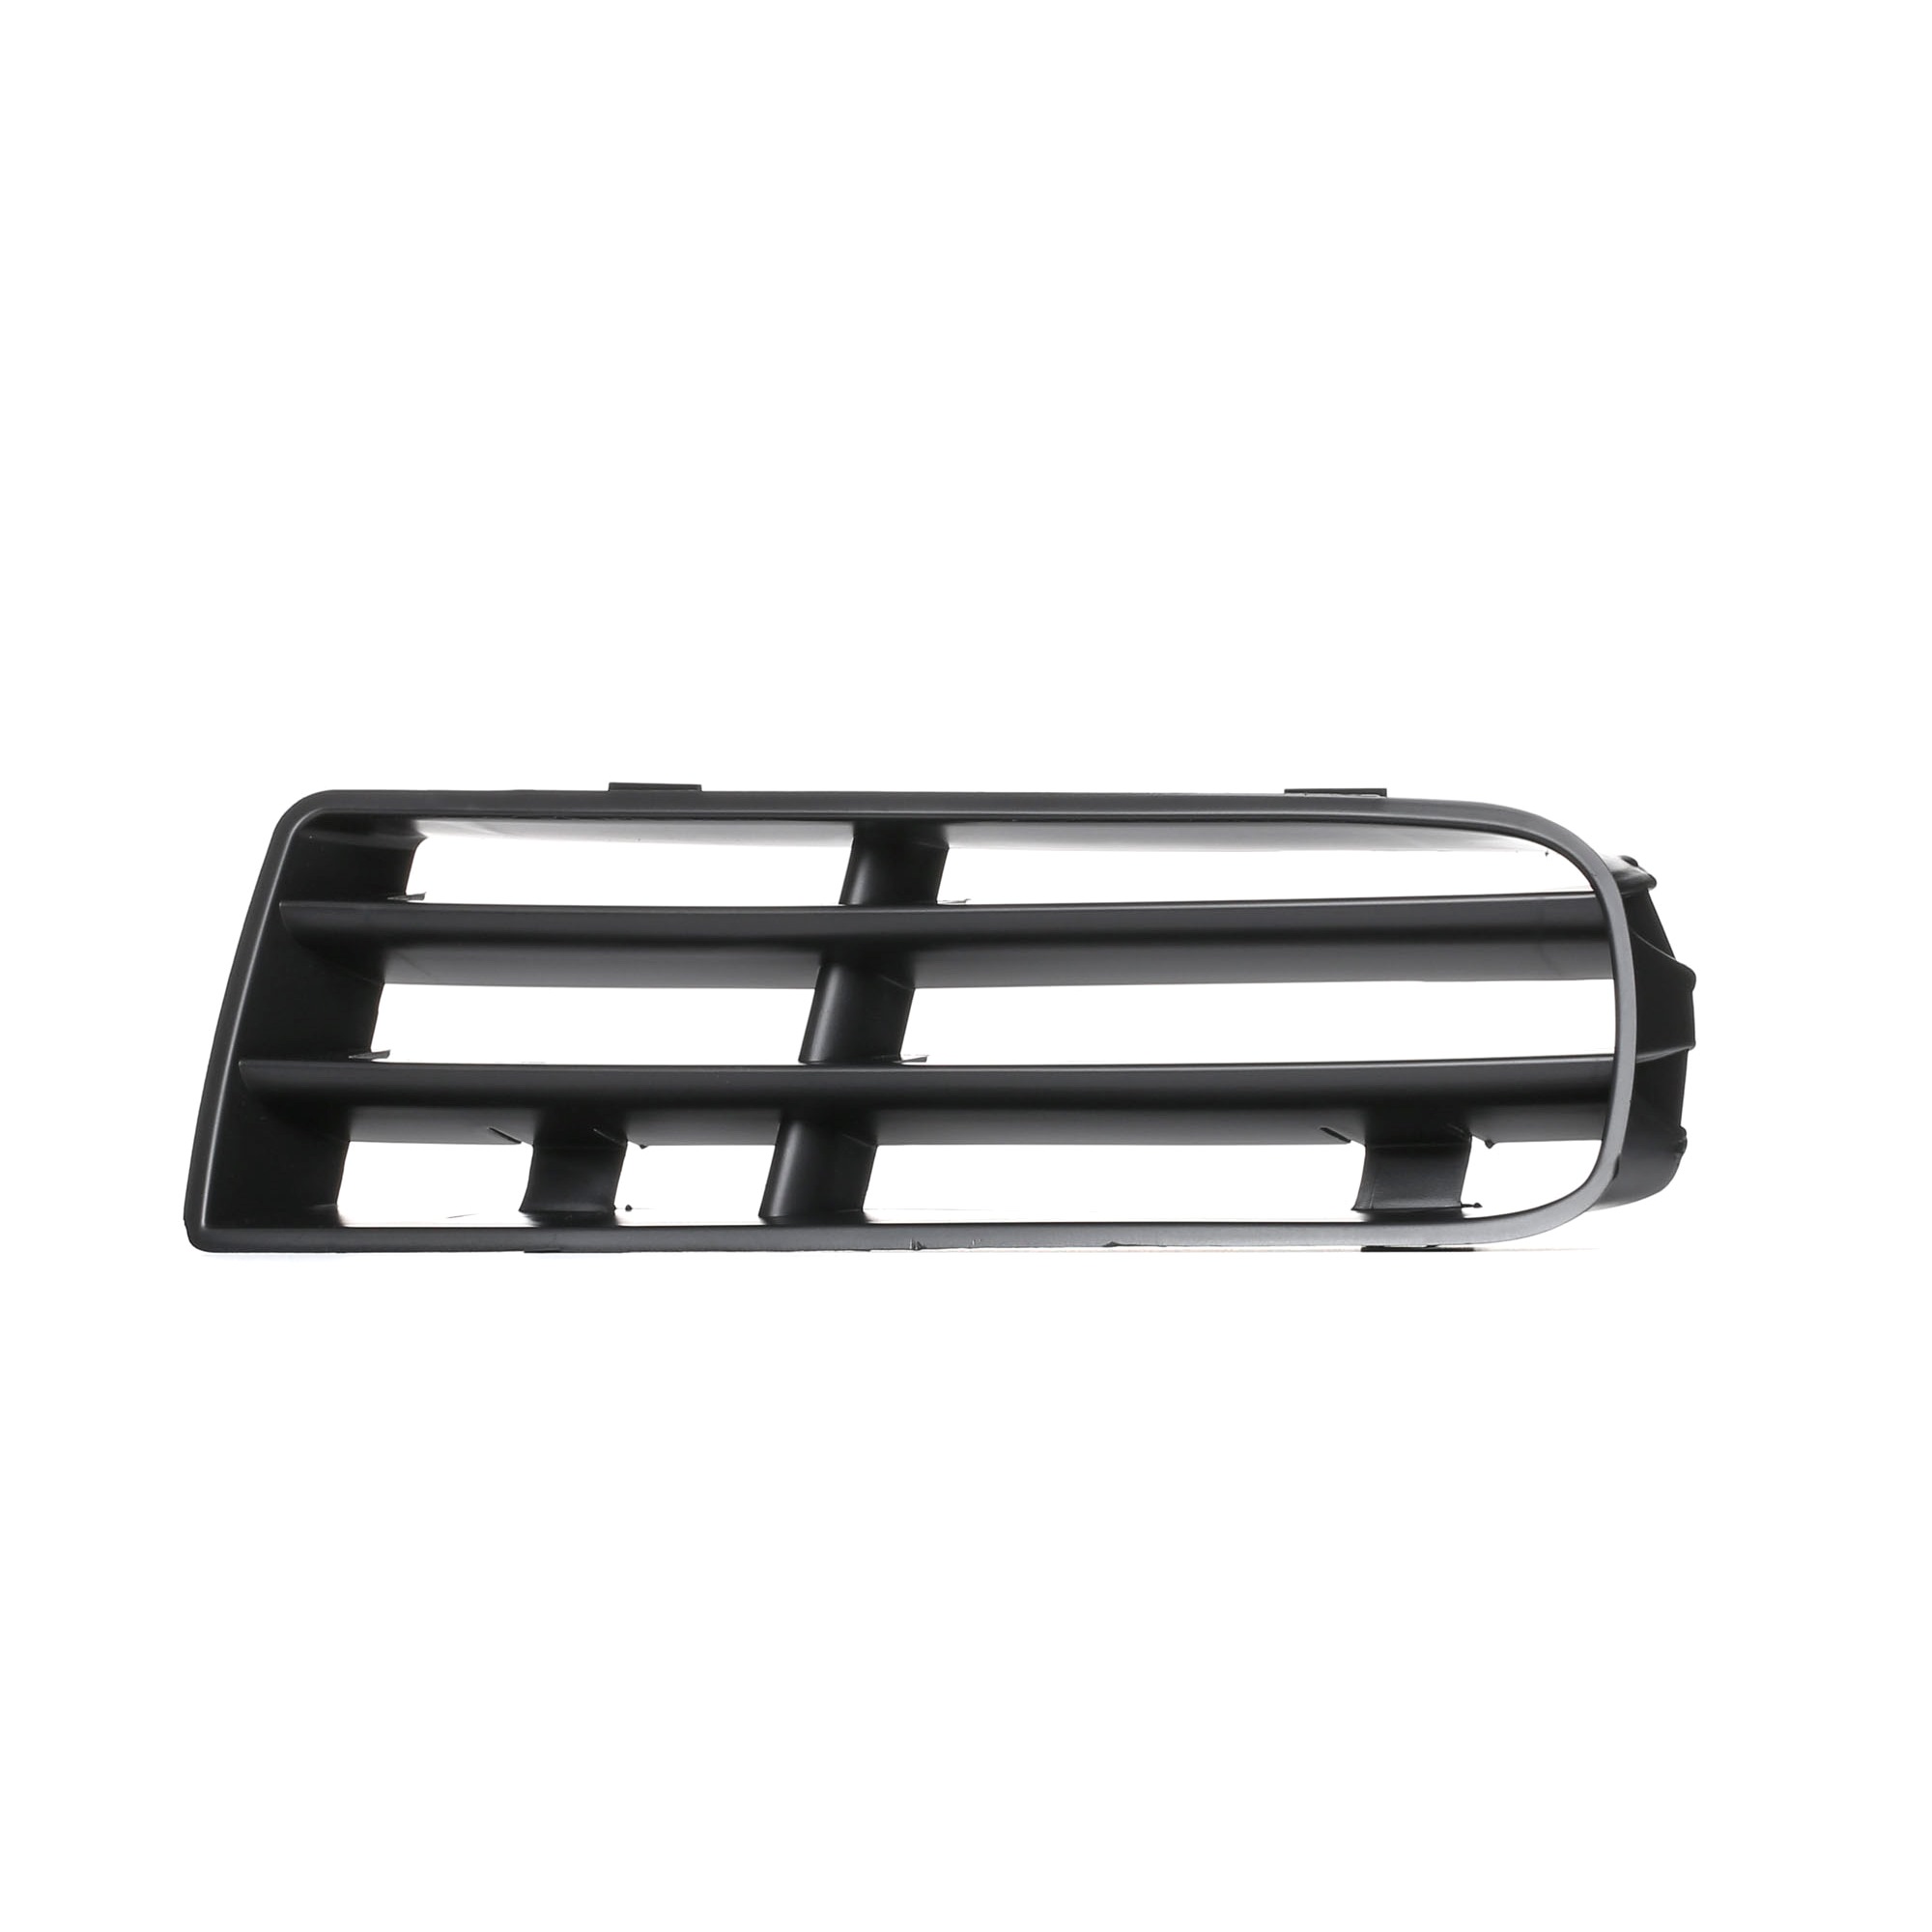 Volkswagen Bumper grill BLIC 6502-07-9523998P at a good price